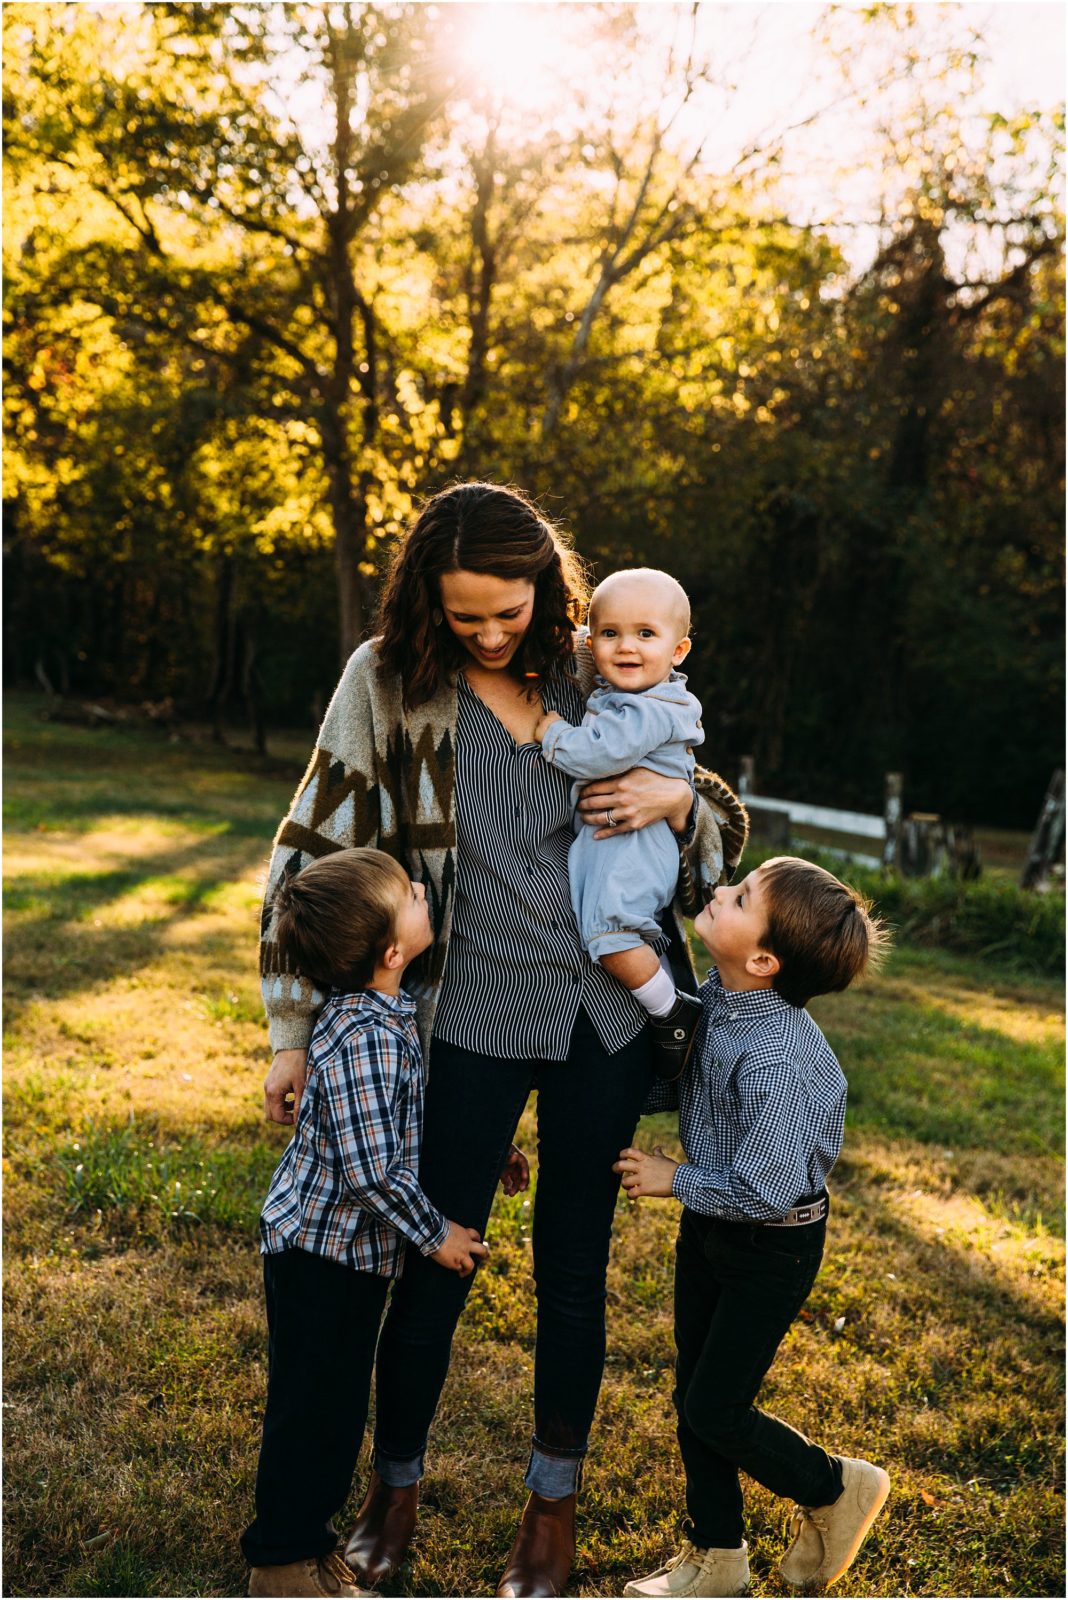 Family Photography with the Davis Fam in Chattanooga, TN | Sara Lane ...